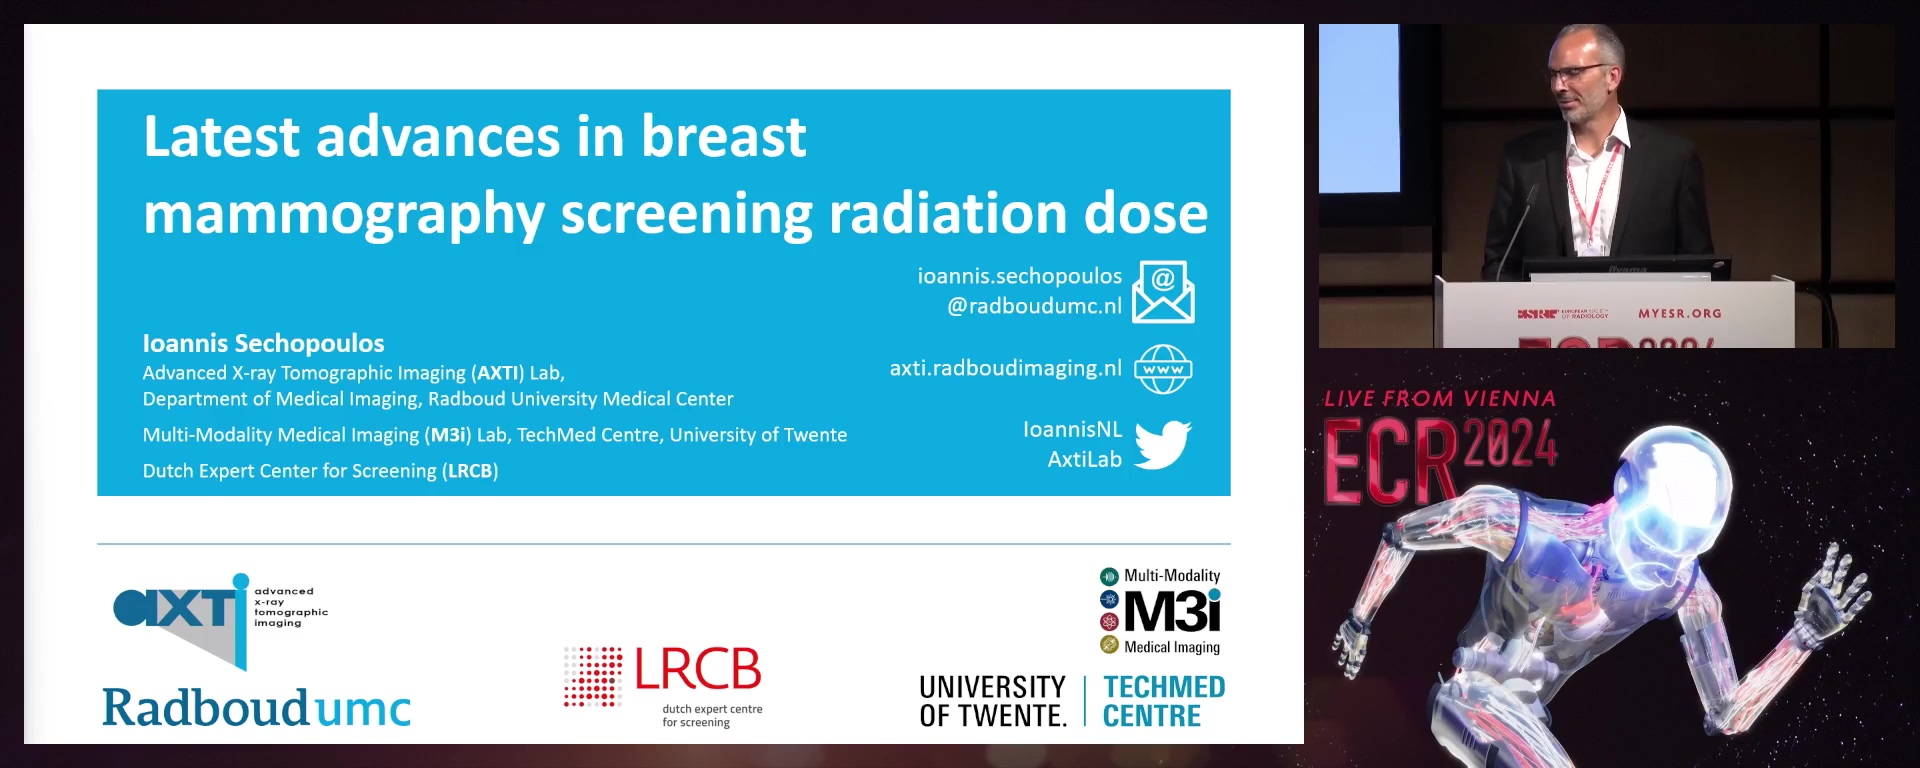 The latest advances in breast mammography screening radiation dose